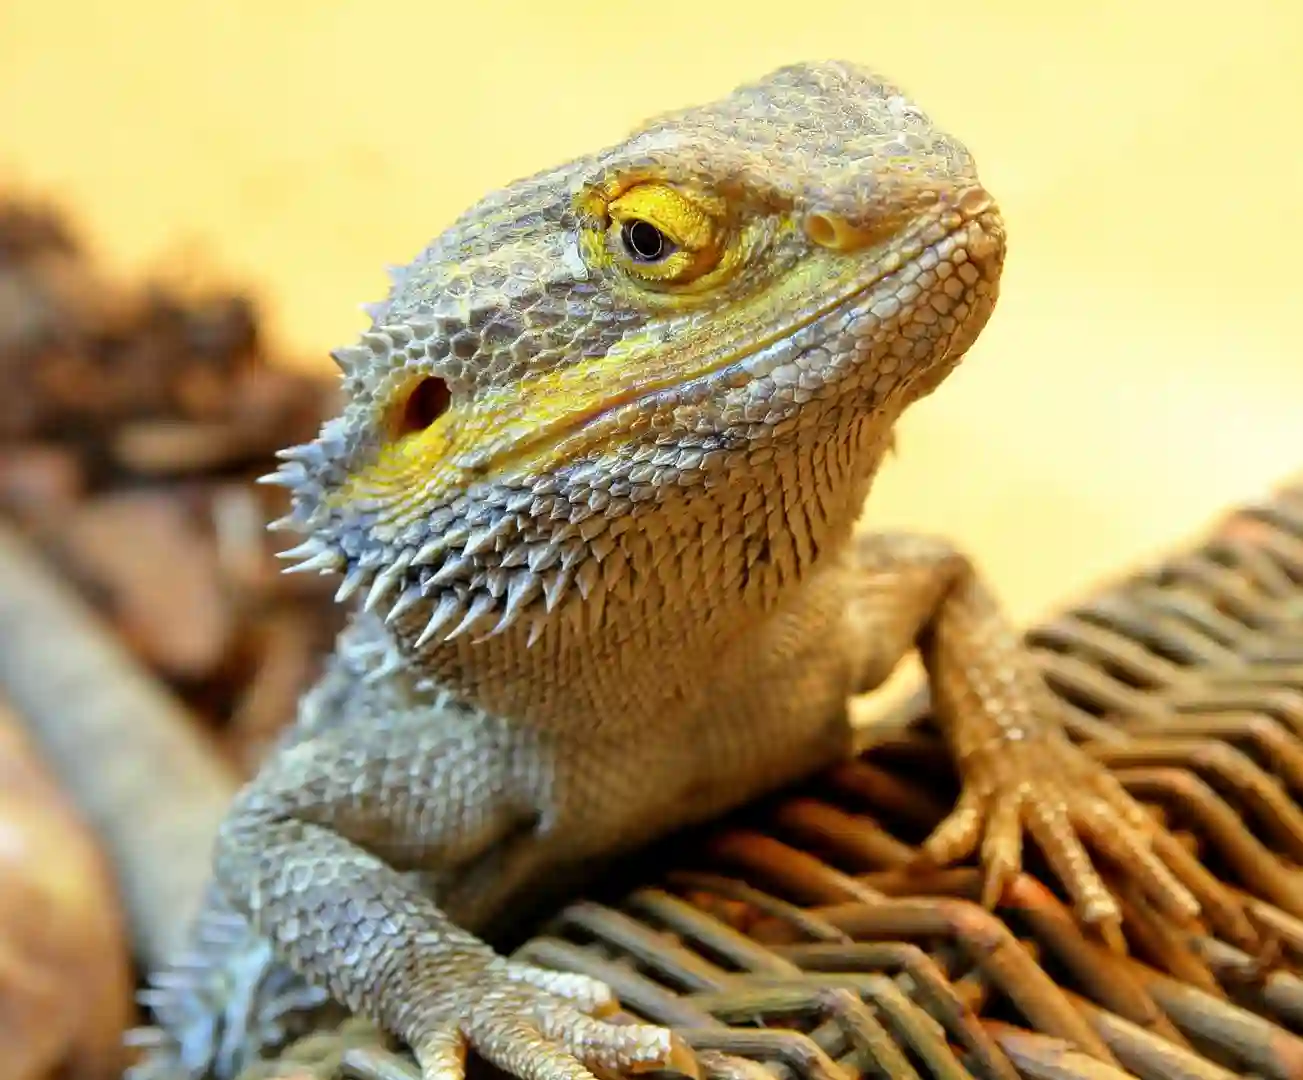 Can Bearded Dragons Eat Lunch Meat?